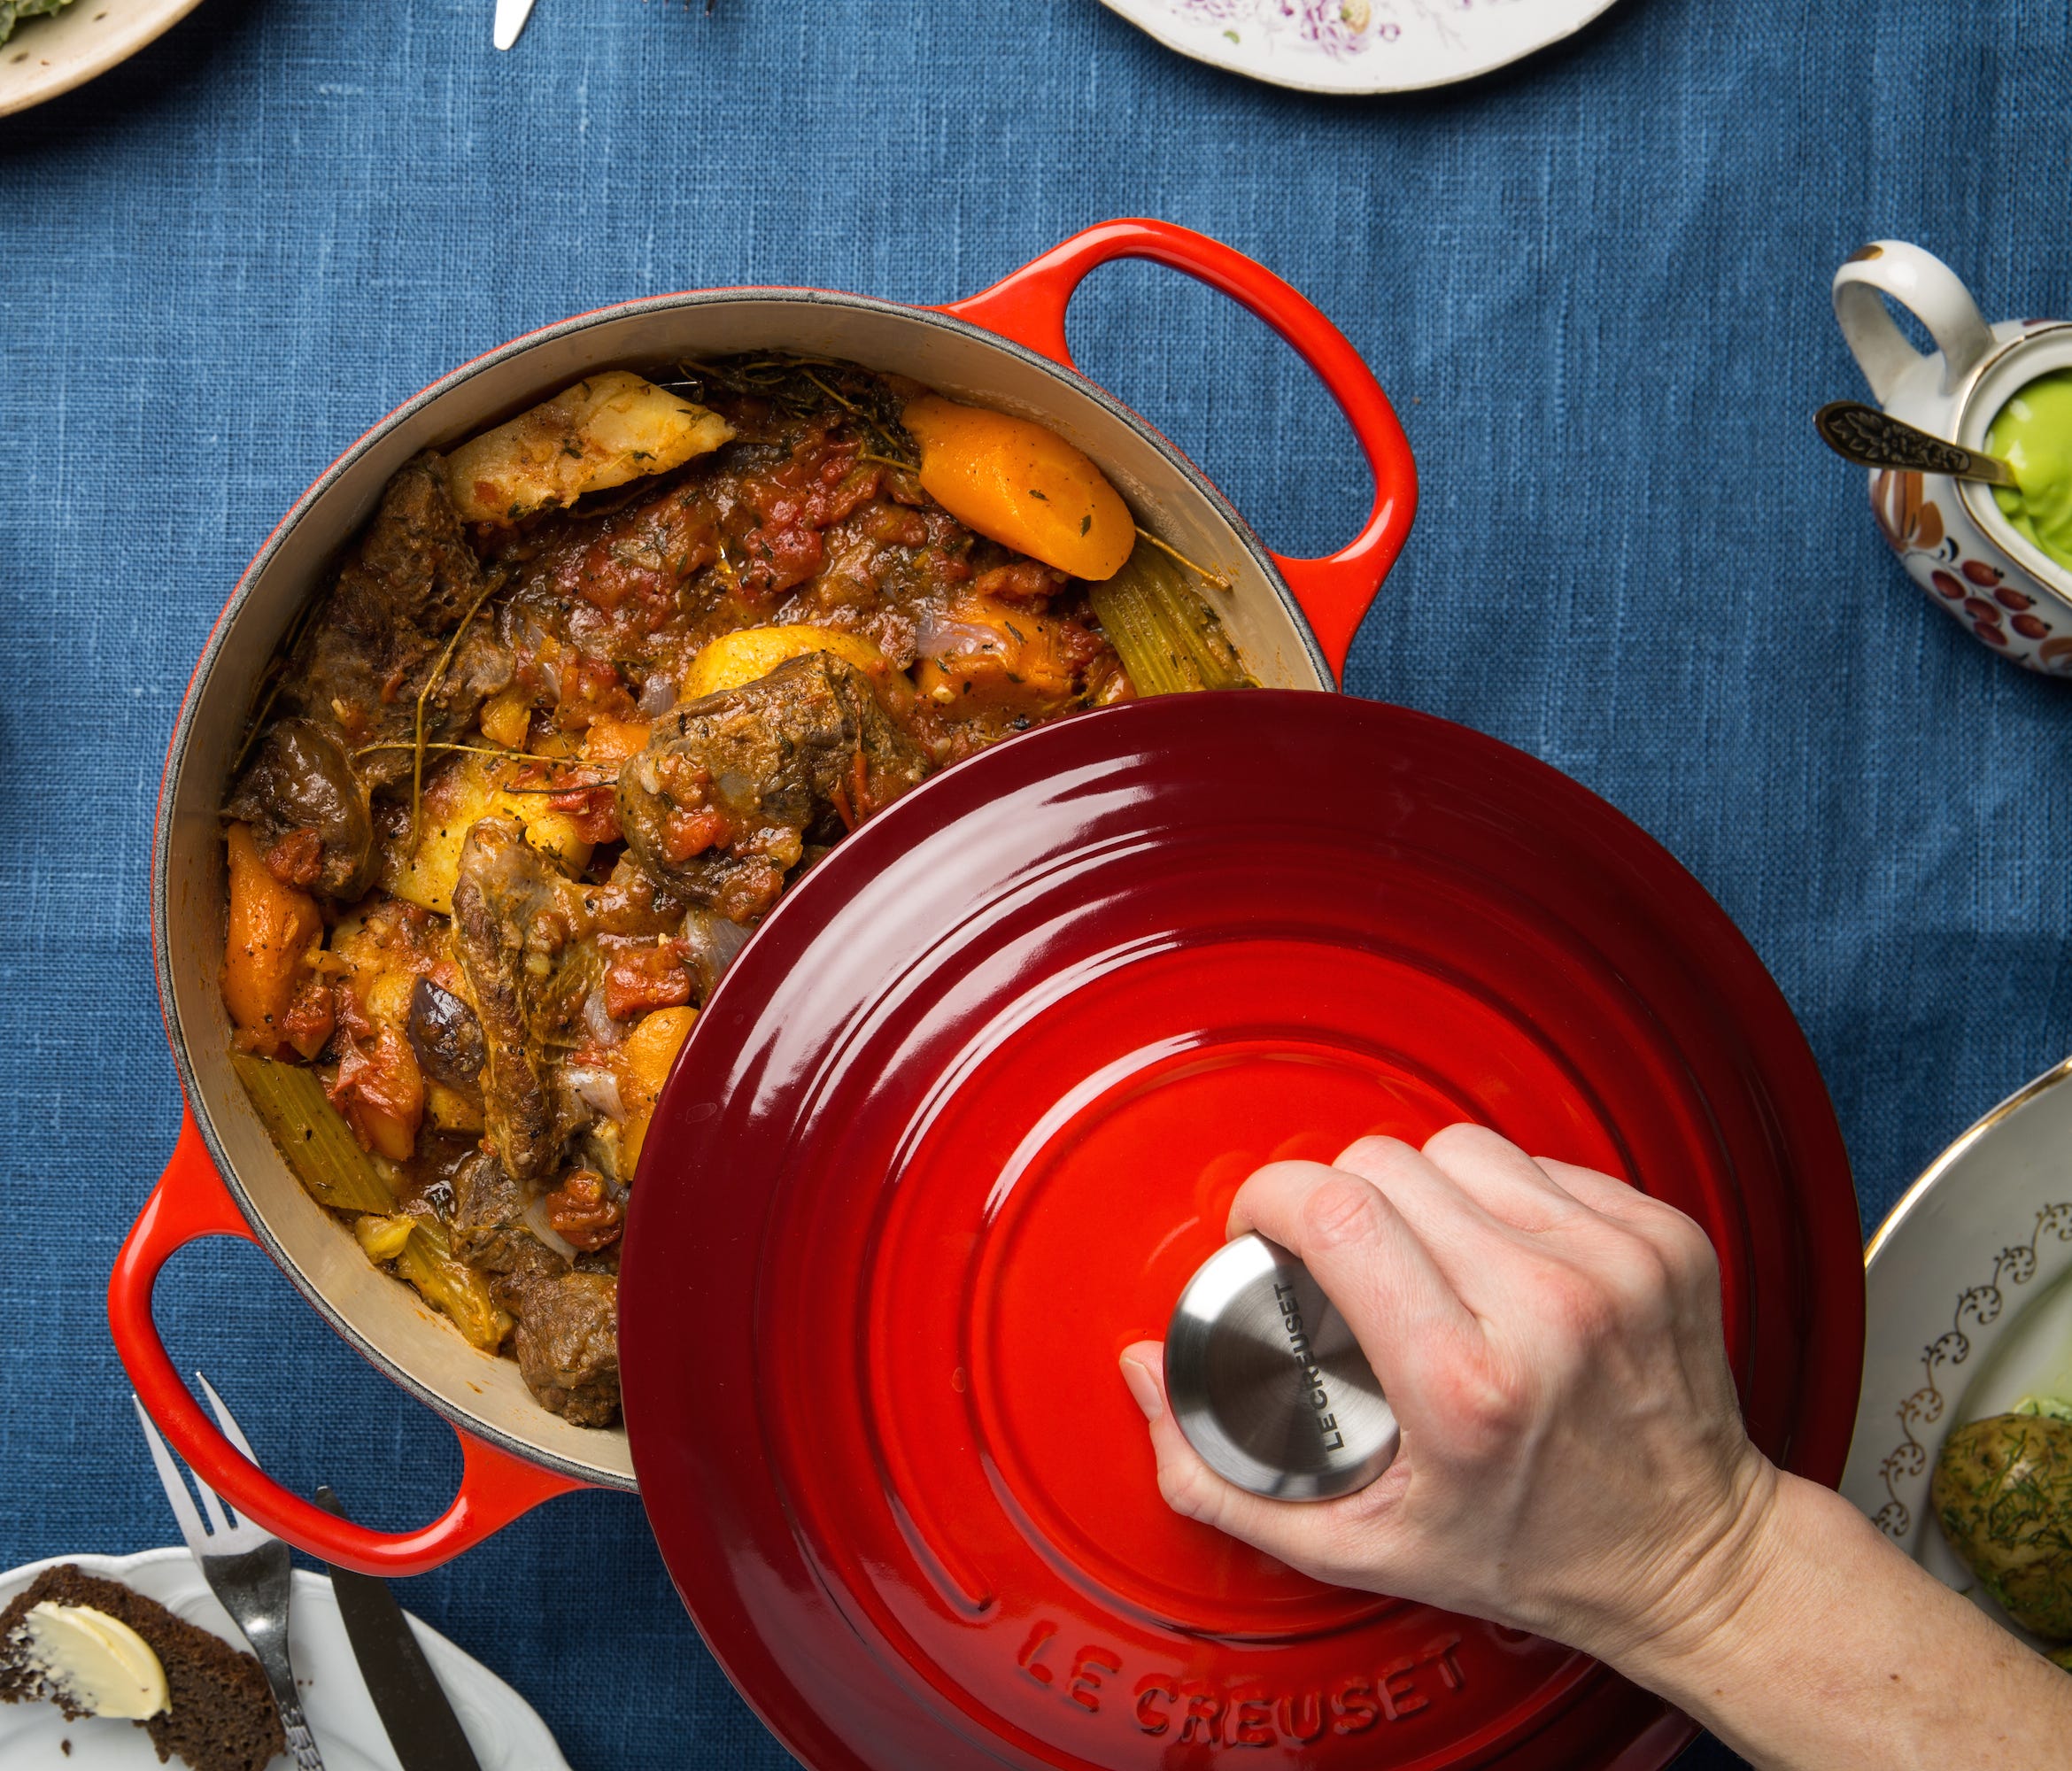 A hearty stew is always a safe bet for a winter meal and this traditional version from Estonia combines beef with root vegetables for a tasty, filling and warming dish.